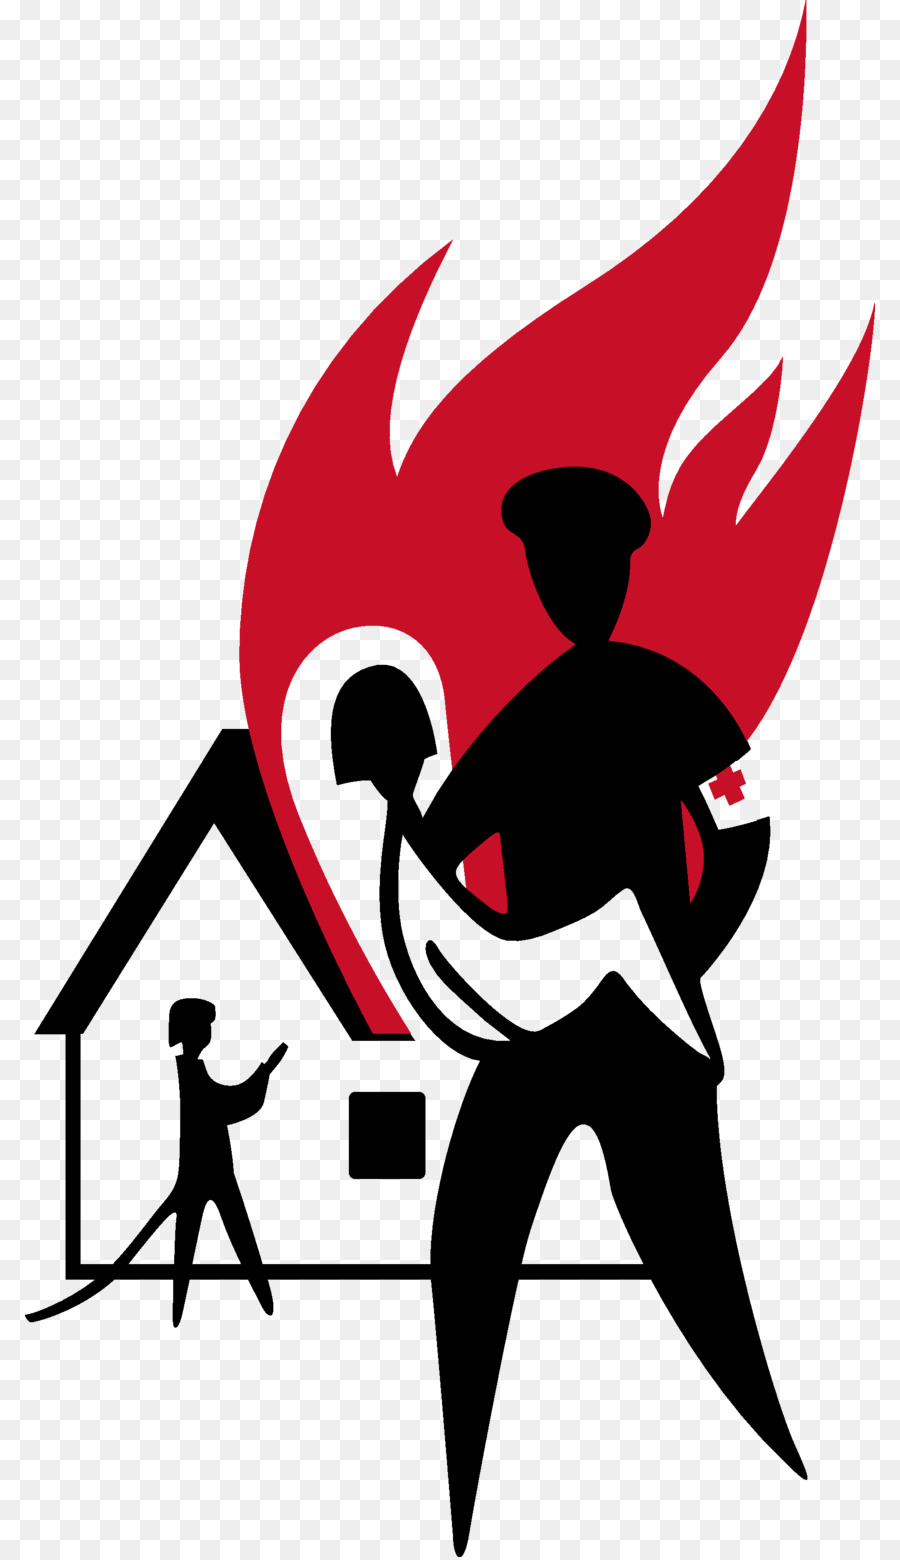 Art Silhouette - firefighter png download - 850*1557 - Free Transparent Art png Download.